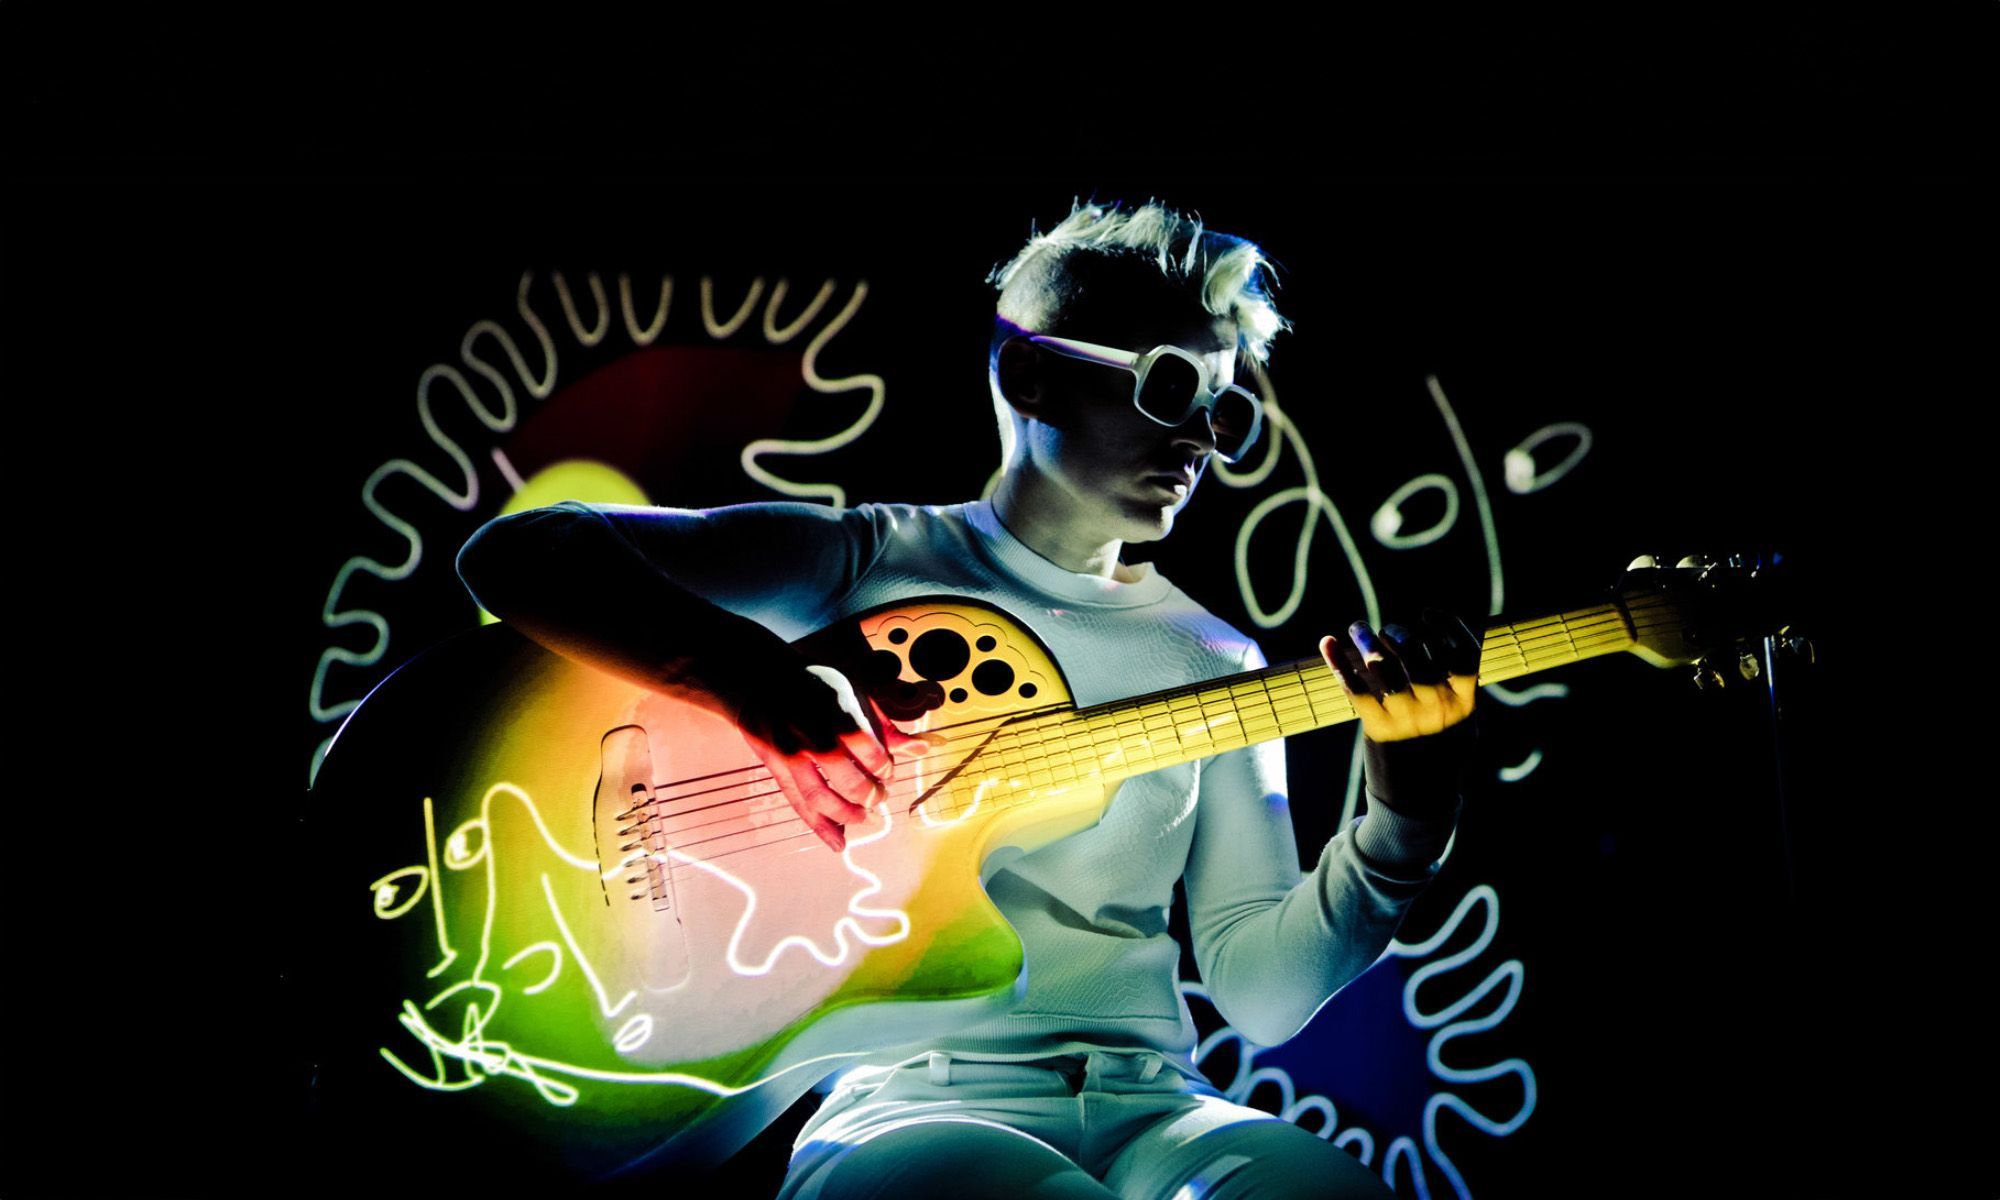 A person plays the guitar. A colorful illustration is projected on them and the guitar. 